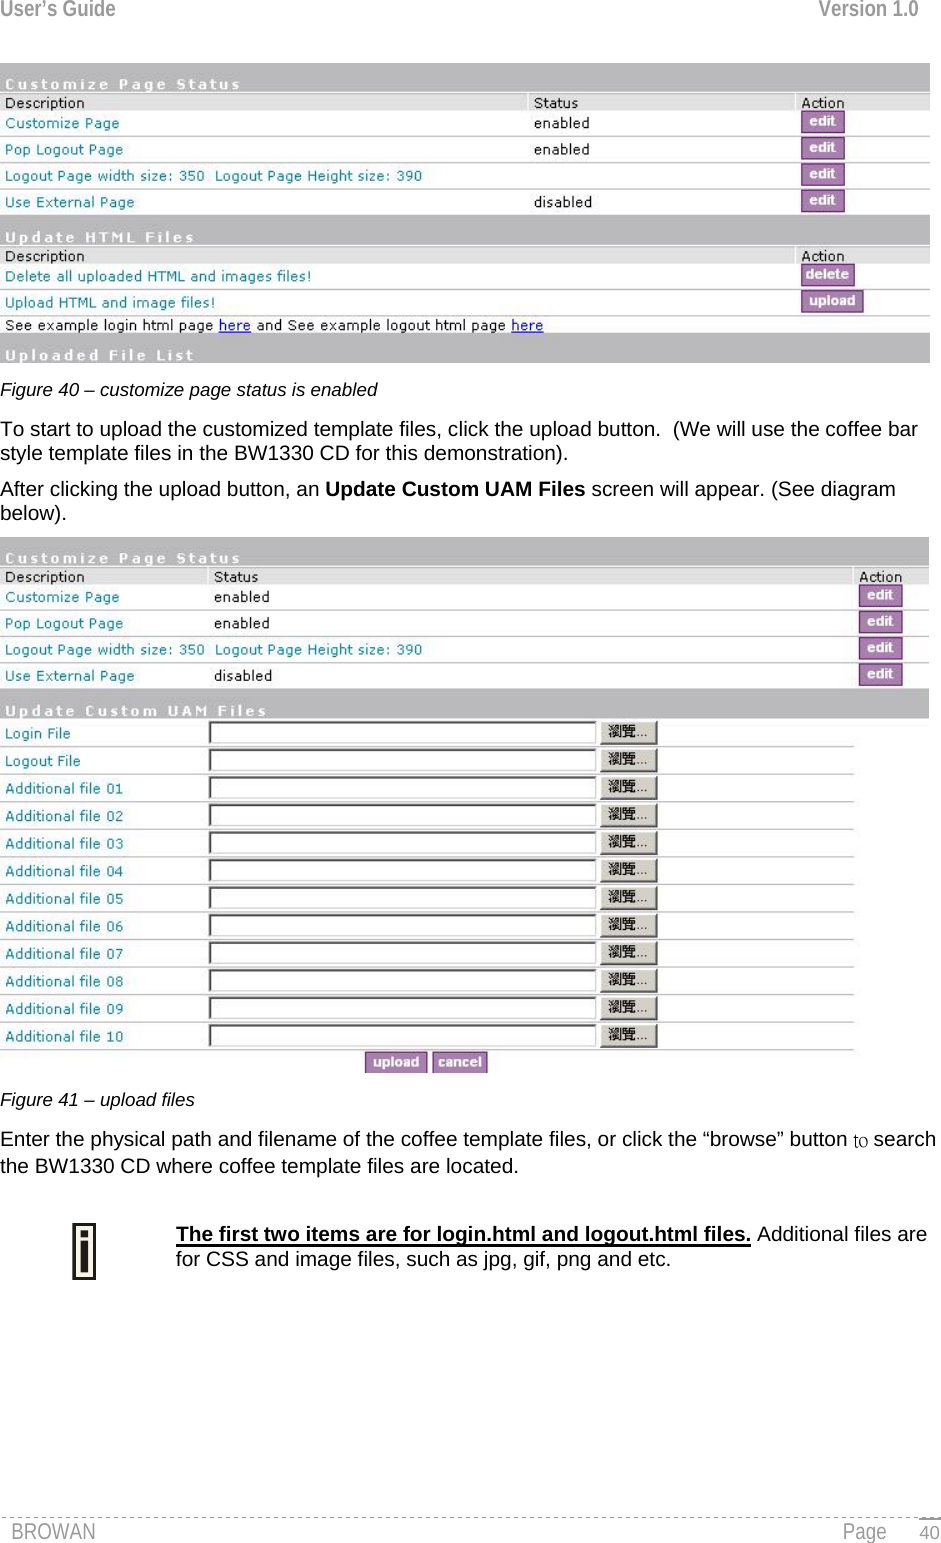 User’s Guide  Version 1.0   Figure 40 – customize page status is enabled  To start to upload the customized template files, click the upload button.  (We will use the coffee bar style template files in the BW1330 CD for this demonstration). After clicking the upload button, an Update Custom UAM Files screen will appear. (See diagram below).    Figure 41 – upload files Enter the physical path and filename of the coffee template files, or click the “browse” button to search the BW1330 CD where coffee template files are located.   The first two items are for login.html and logout.html files. Additional files are for CSS and image files, such as jpg, gif, png and etc.   BROWAN                                                                                                                                               Page   40